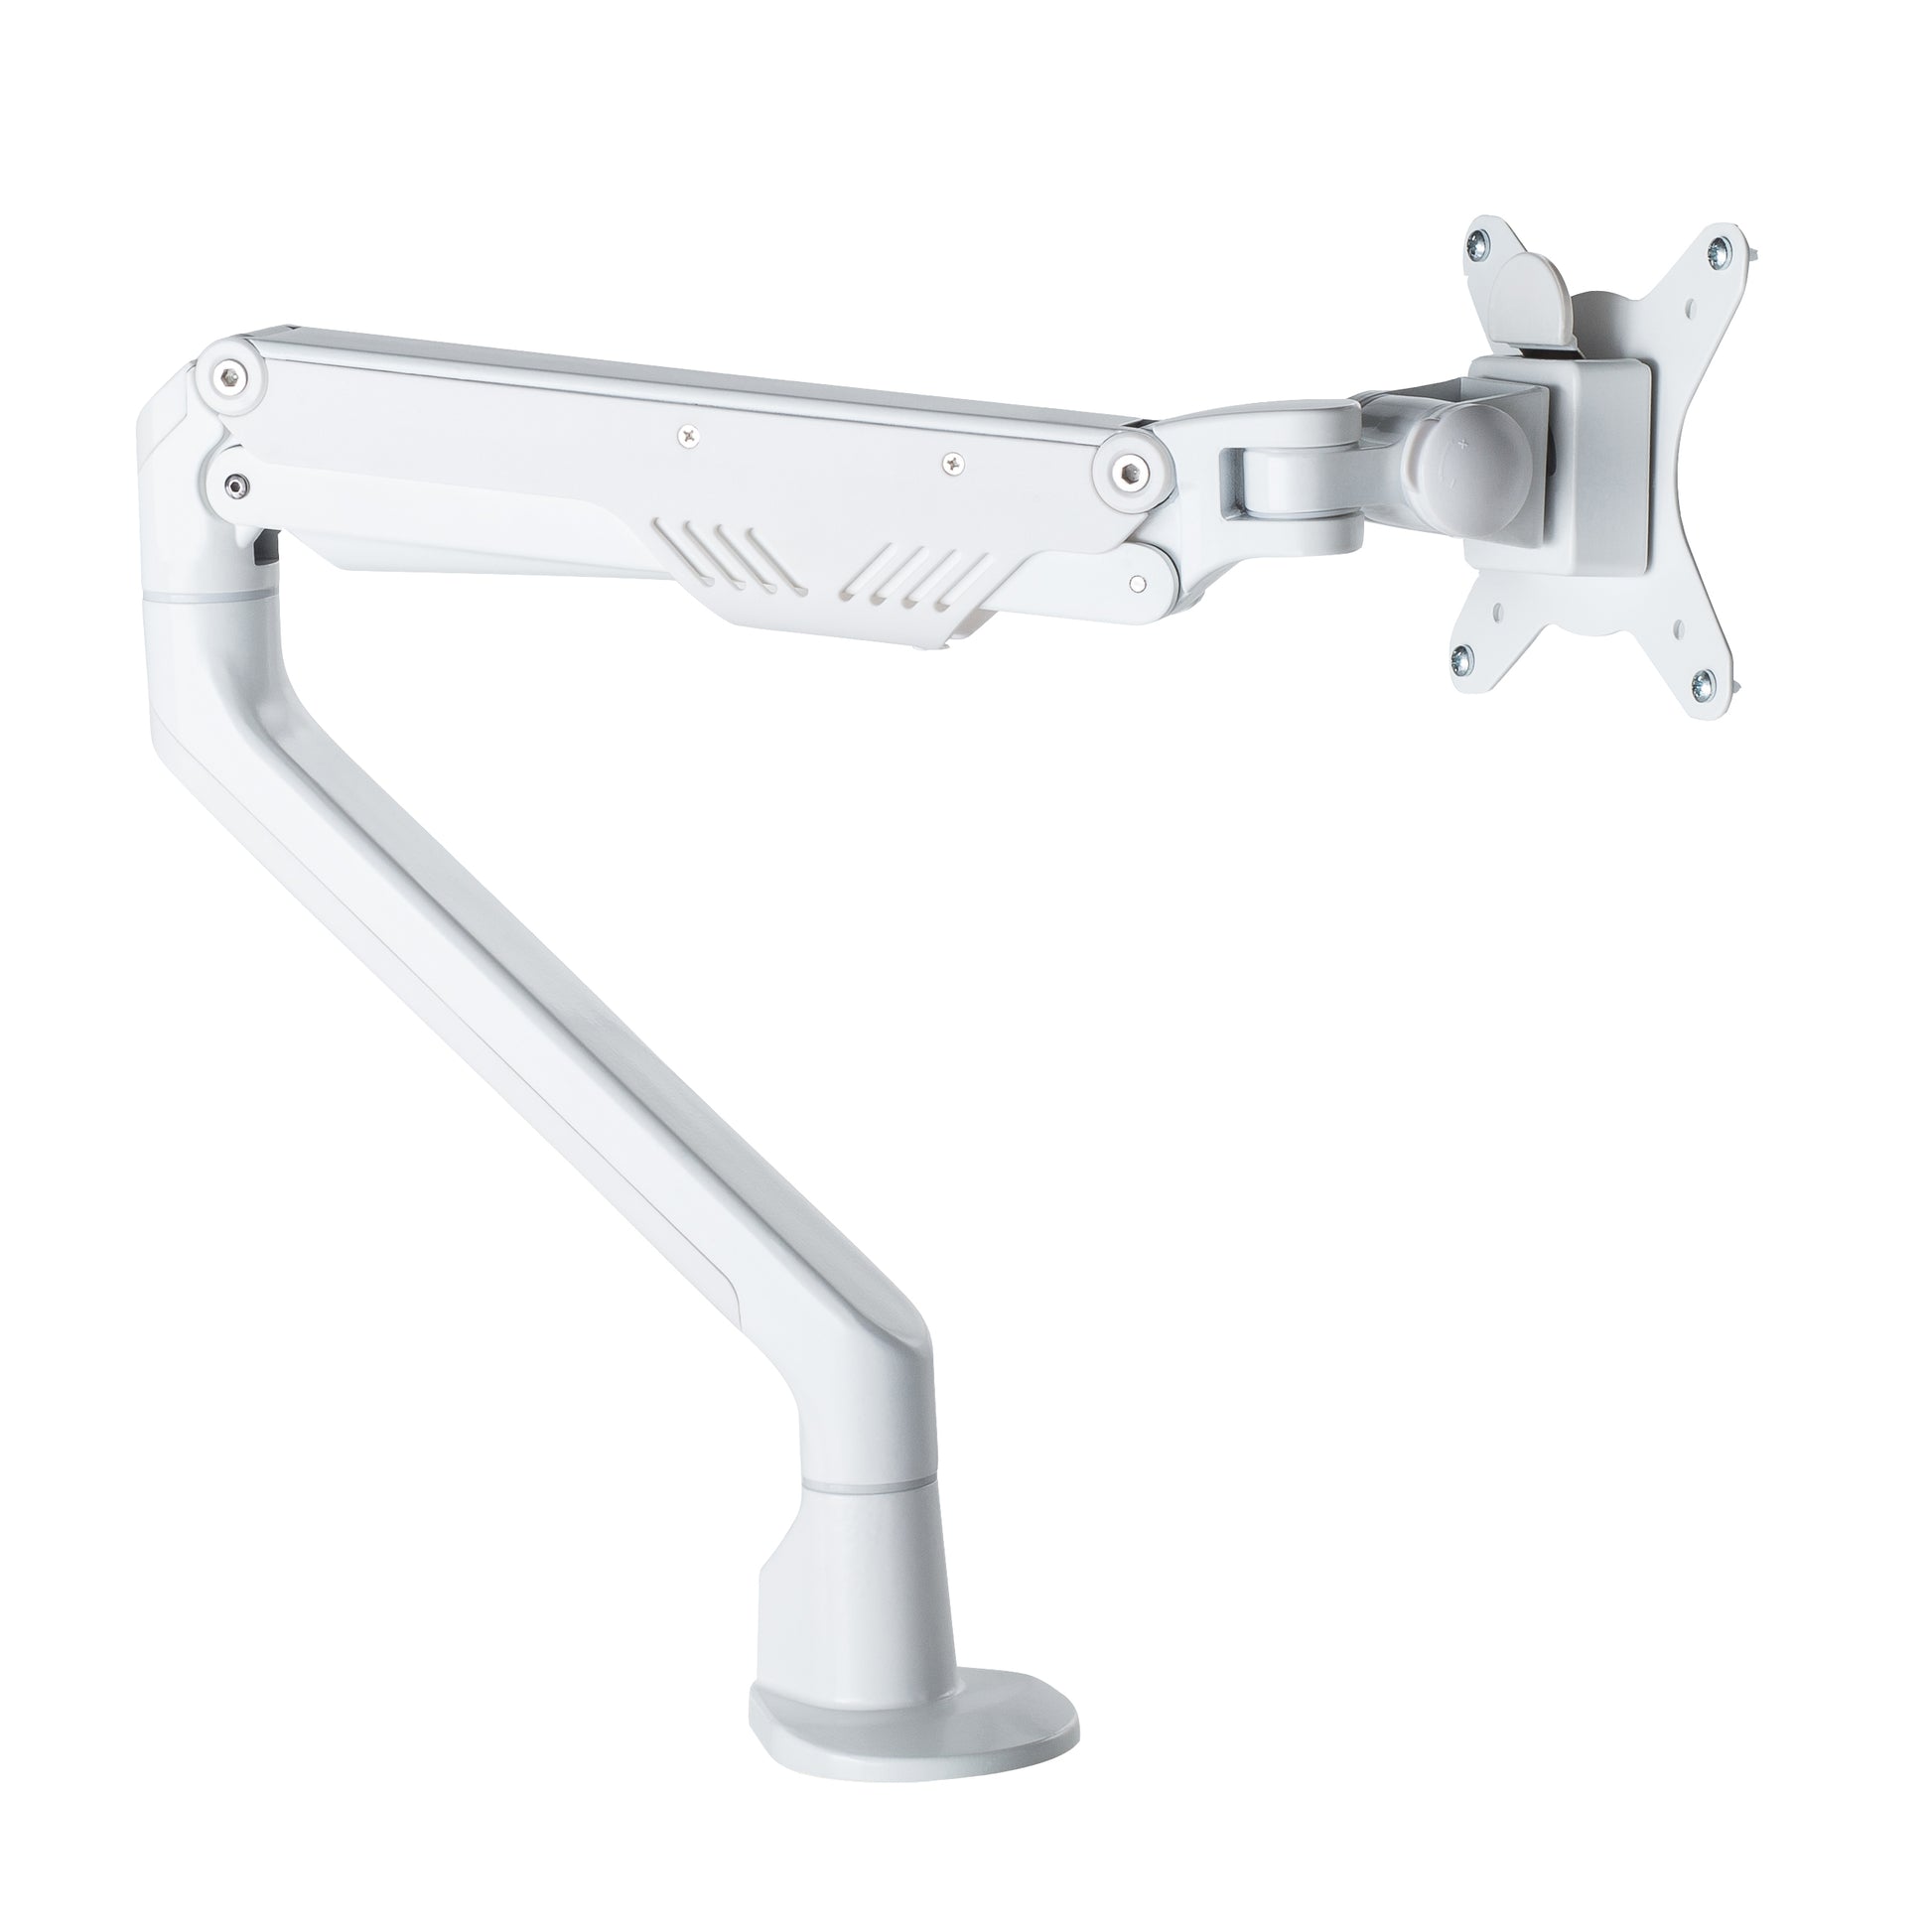 Buy Rapidline Elevate Single Monitor Arm FREE SHIPPING ELEVATE Perfect to use with our range of Standing Desks & Desk Converters! Description Specifications Inclusions Downloads Shipping & Returns Liberate your worktop space with the stylish Elevate single monitor arm. Backed by a 3-year warranty. Colours: White